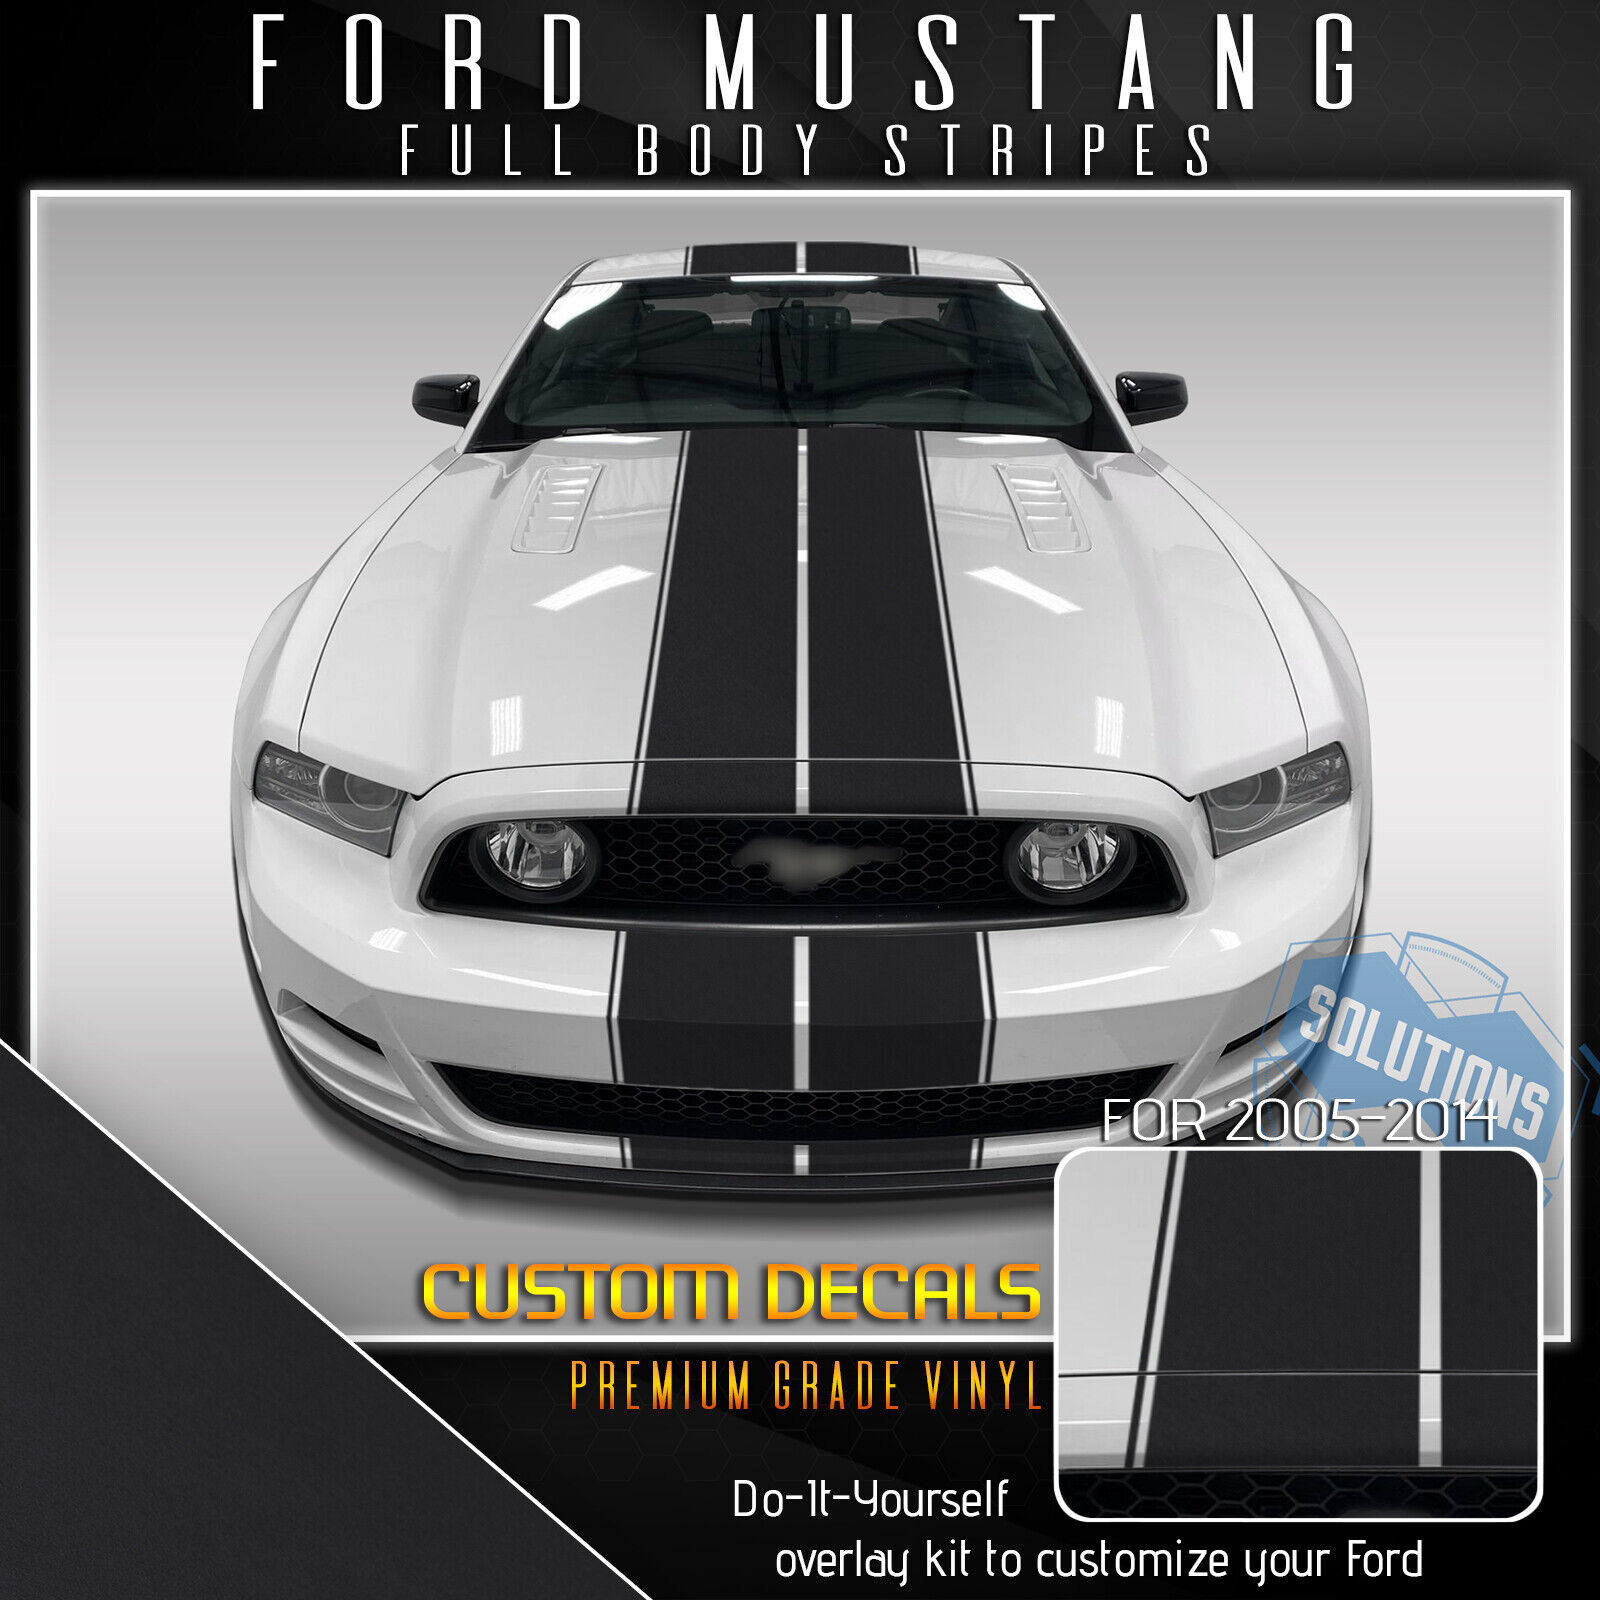 For 2005-2014 Mustang Full Body Rally Racing Stripes Graphic Decal - Matte Vinyl